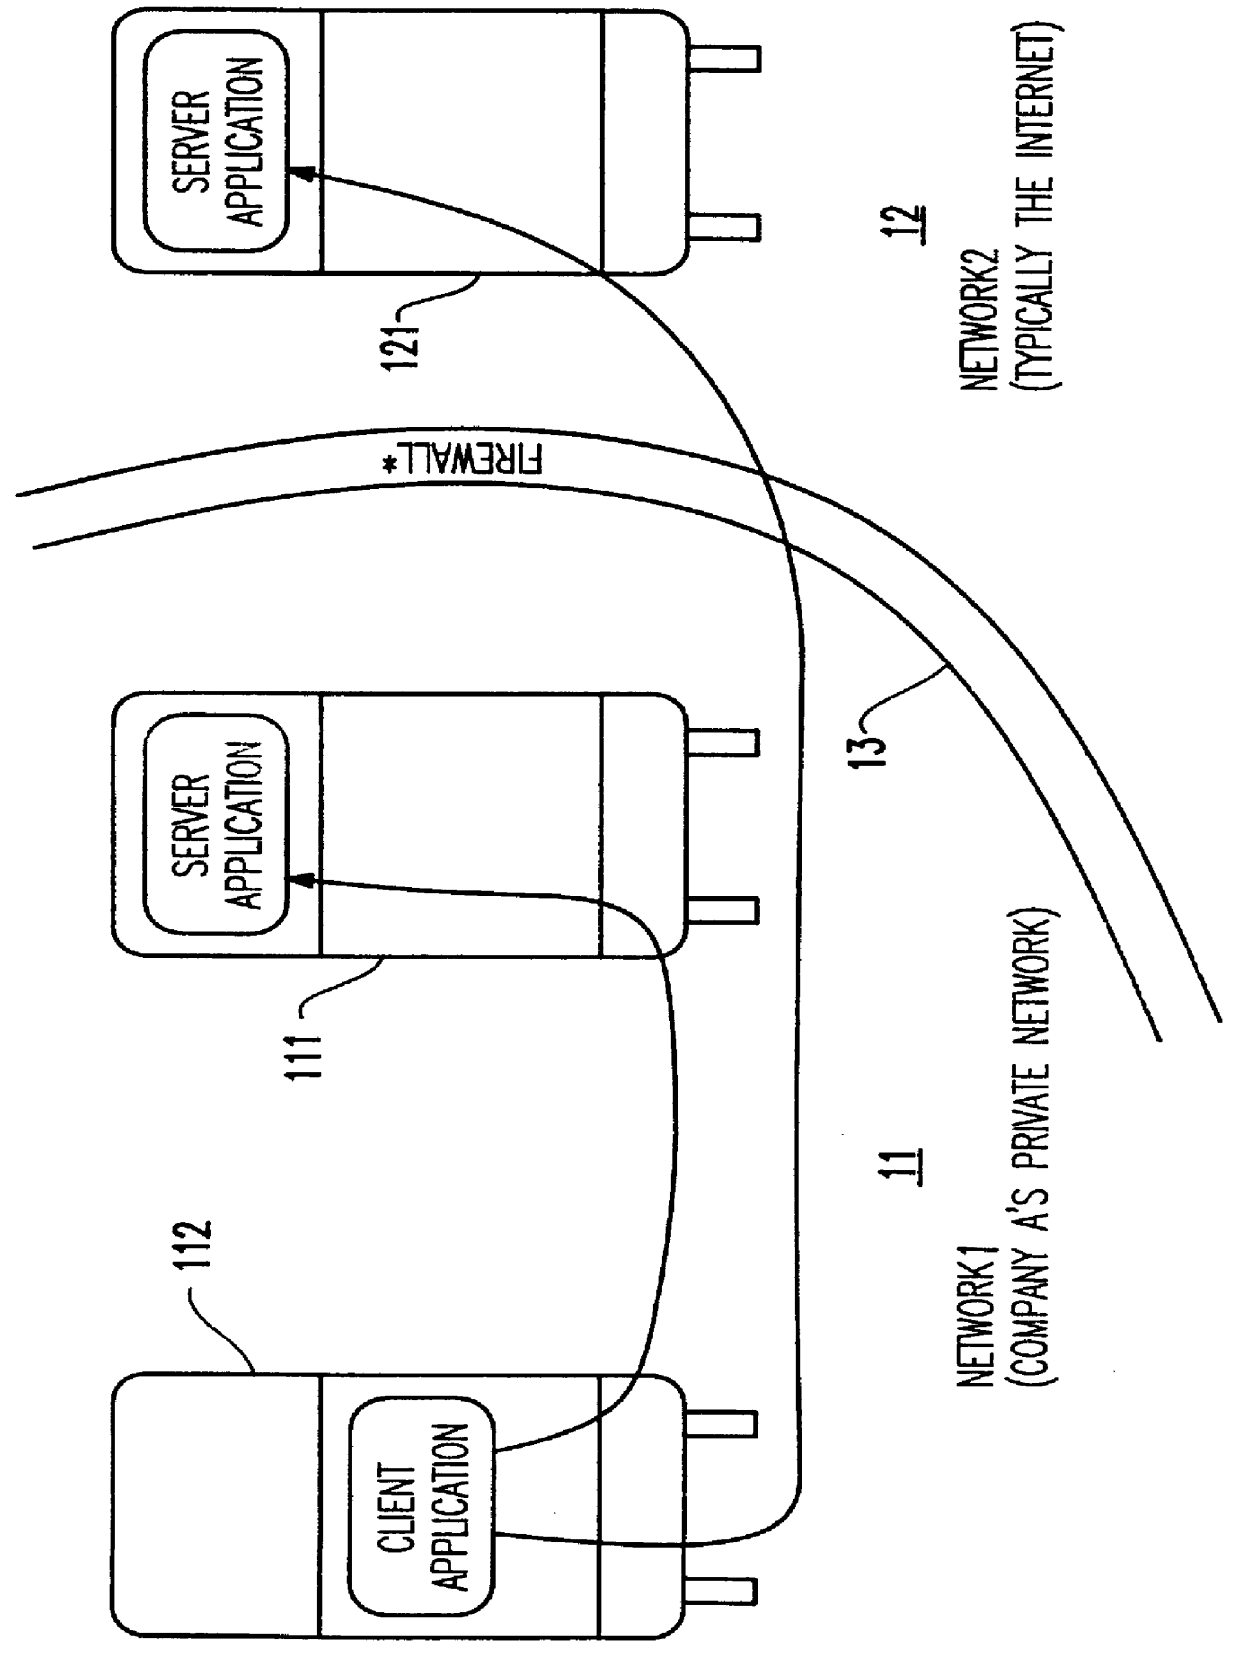 Method and apparatus for lightweight secure communication tunneling over the internet